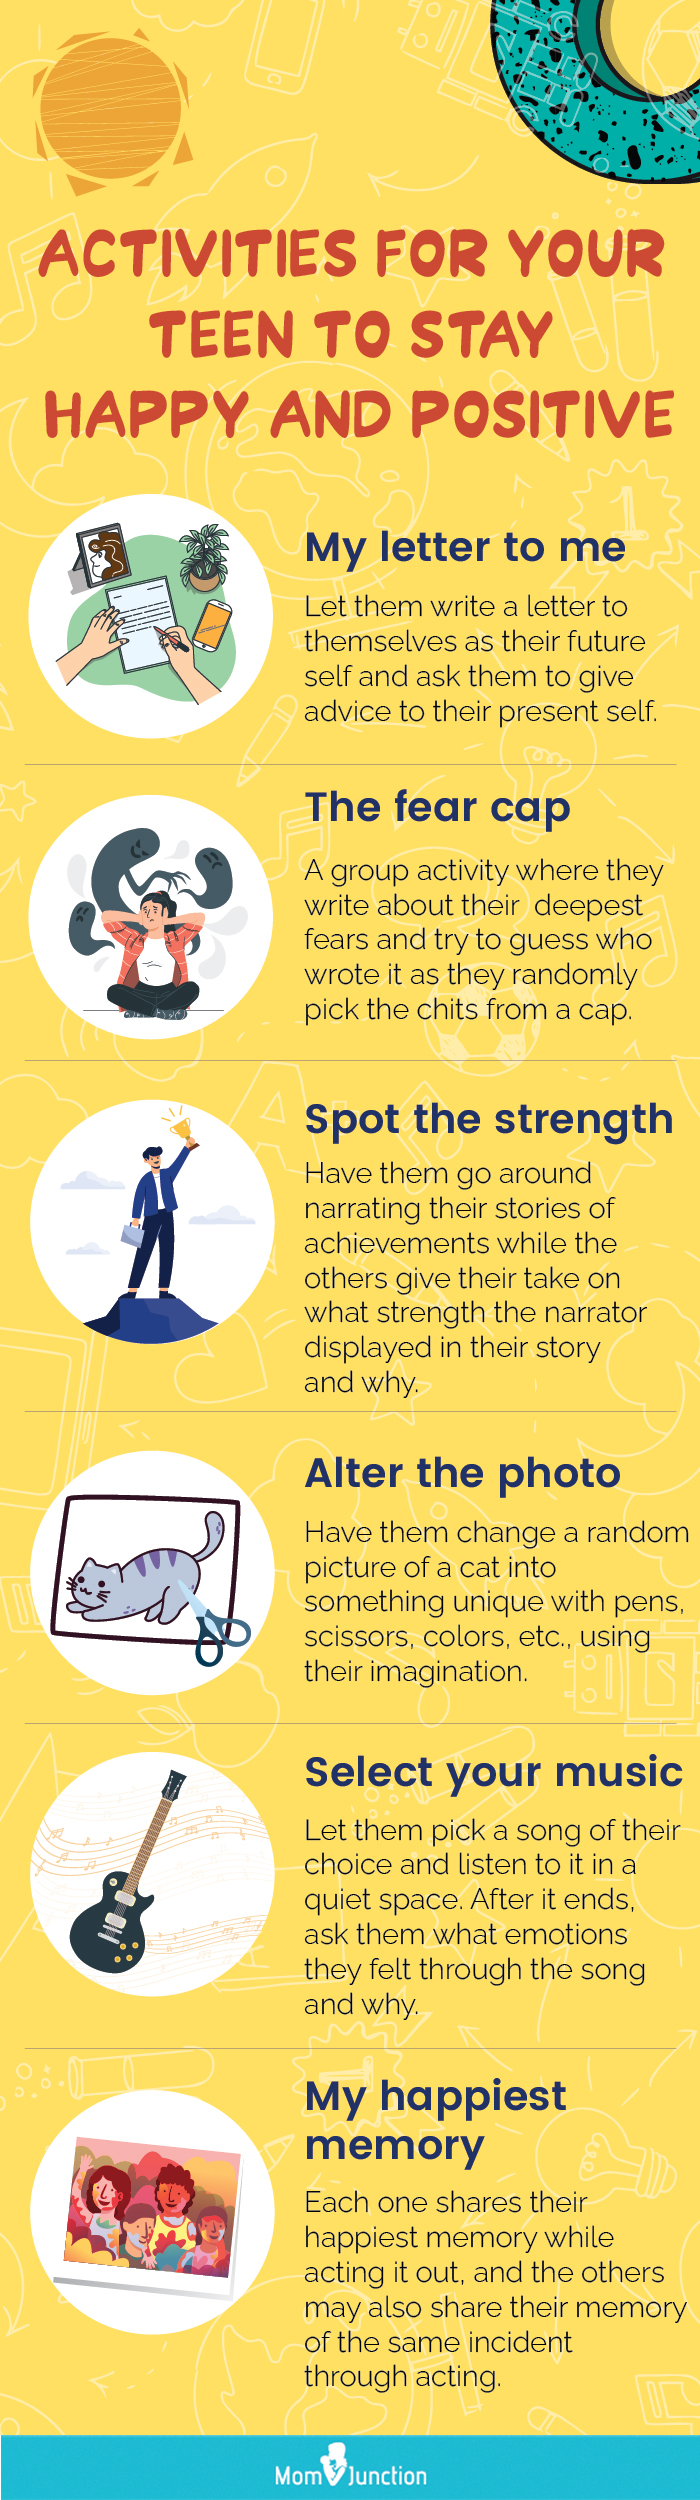 therapy activities for teenagers (infographic)